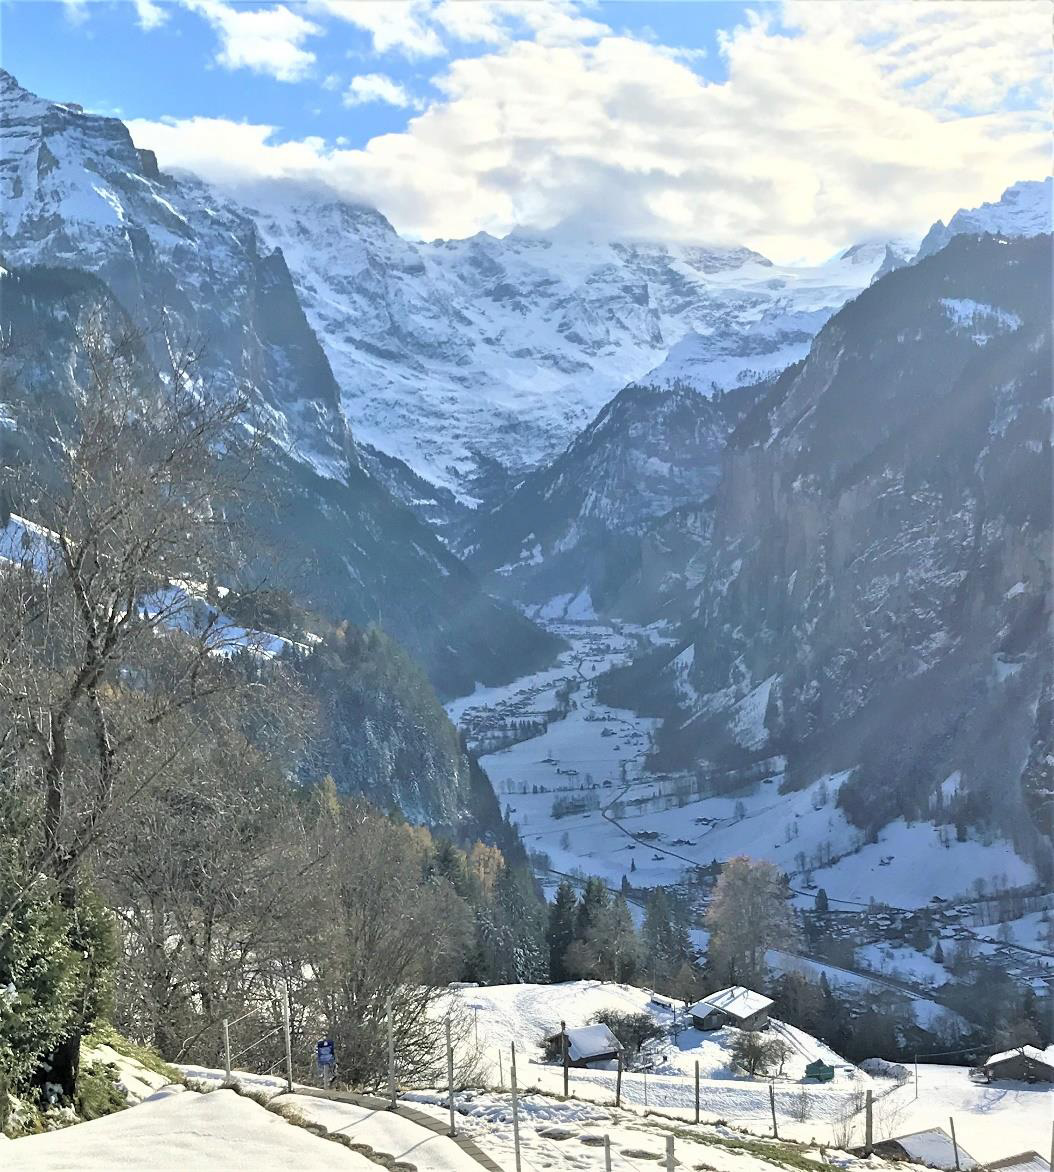 There are several ways to arrive in Wengen for your stay. If flying we would suggest Basel, Zurich, Geneva or possibly even Milan